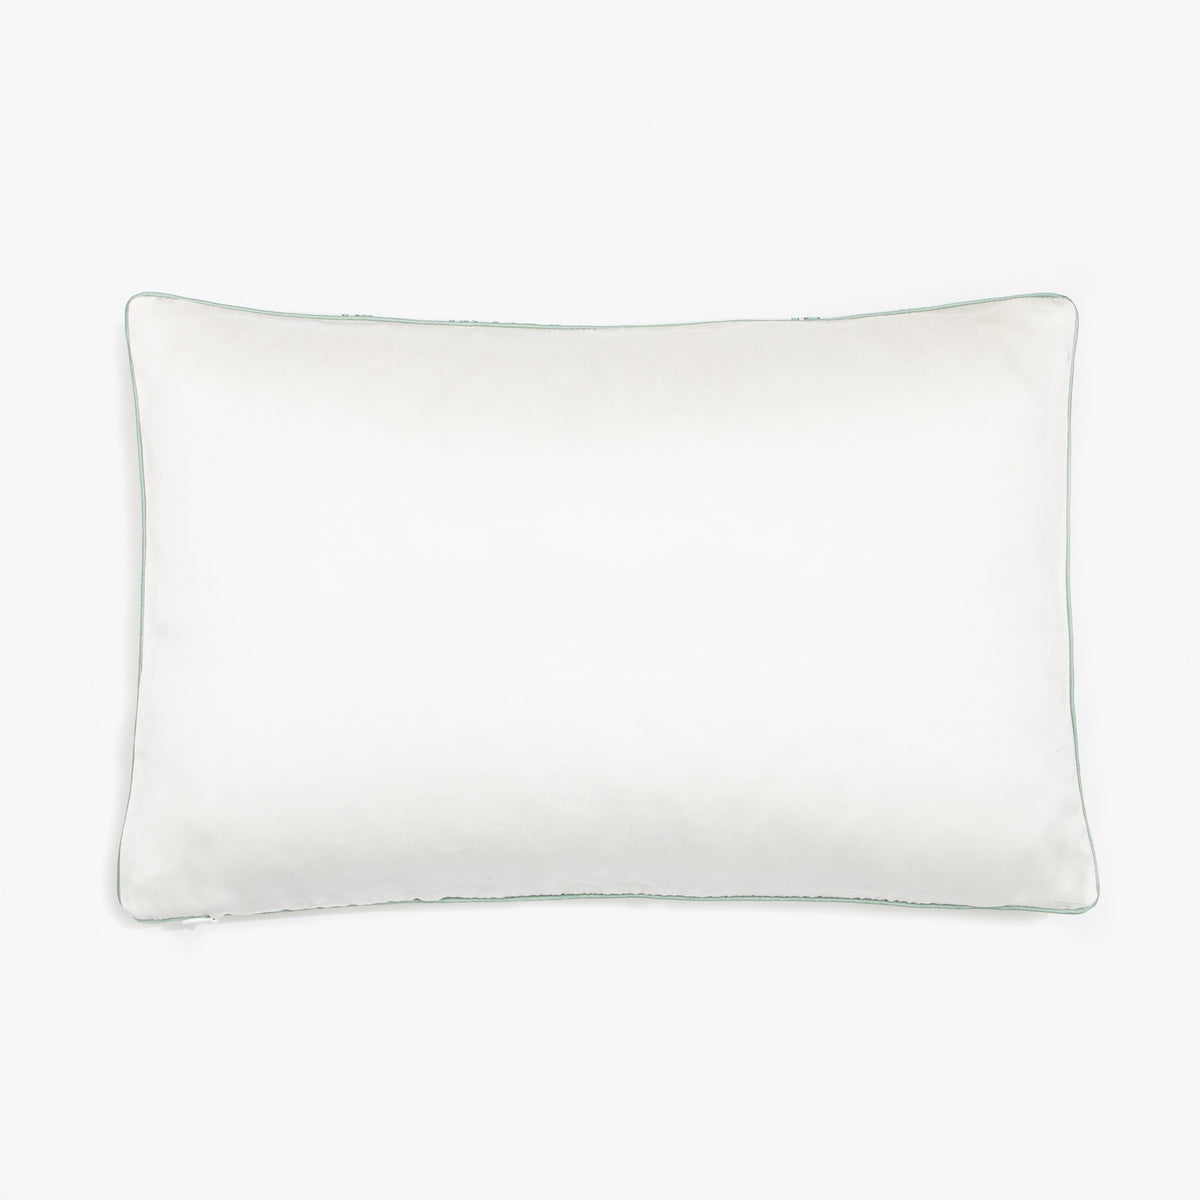 Back image of the Toddler Pillow in the ivory color